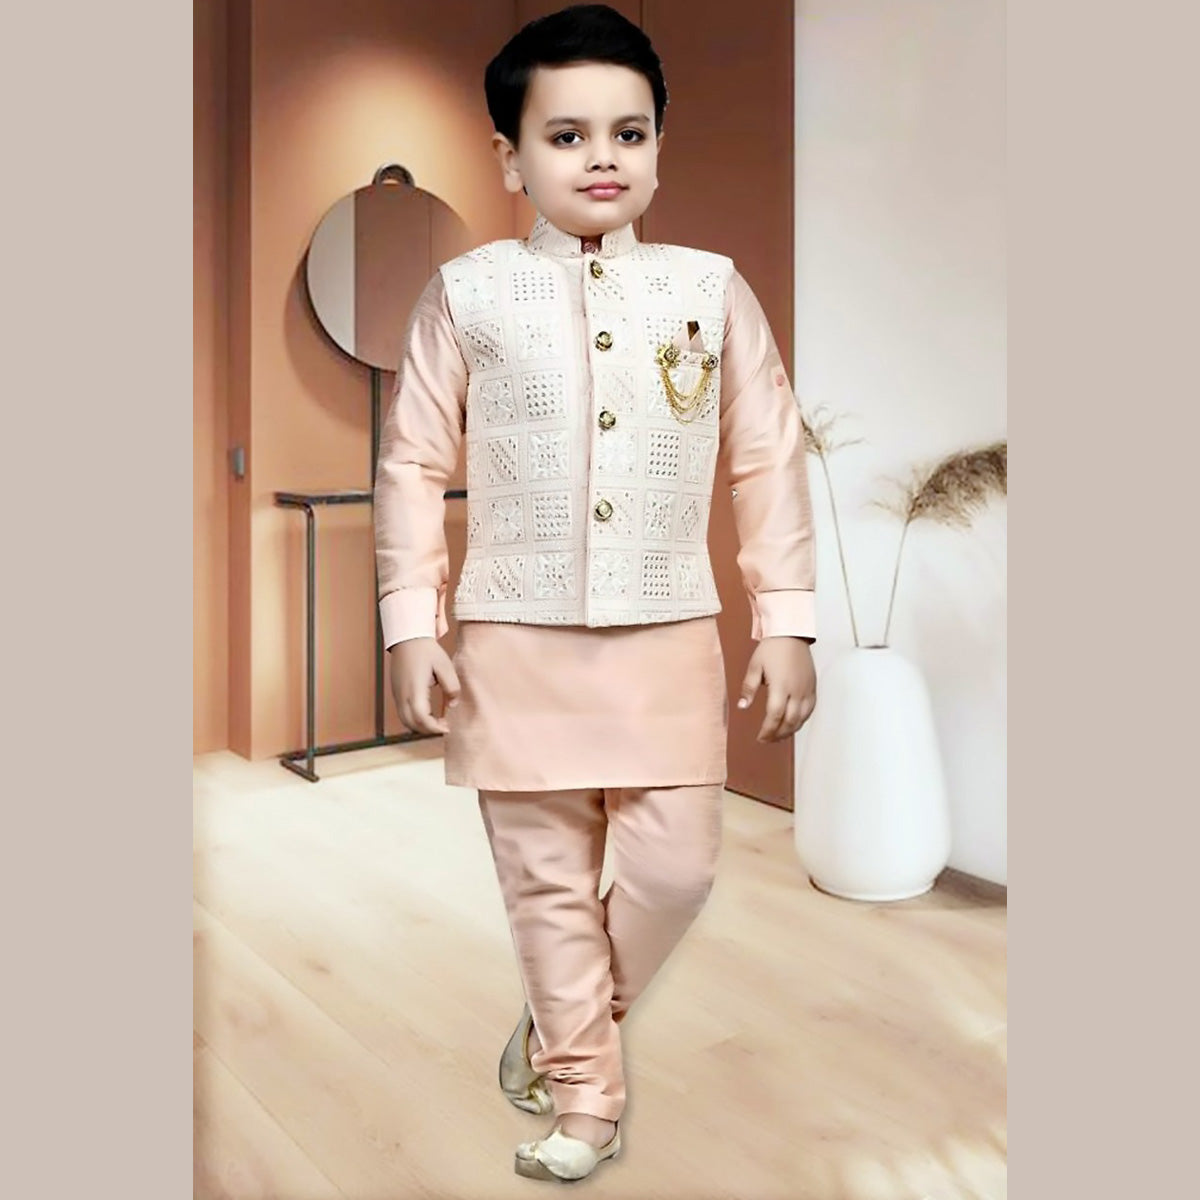 Buy Indian Wear for Boys Online at Best Price | Myntra